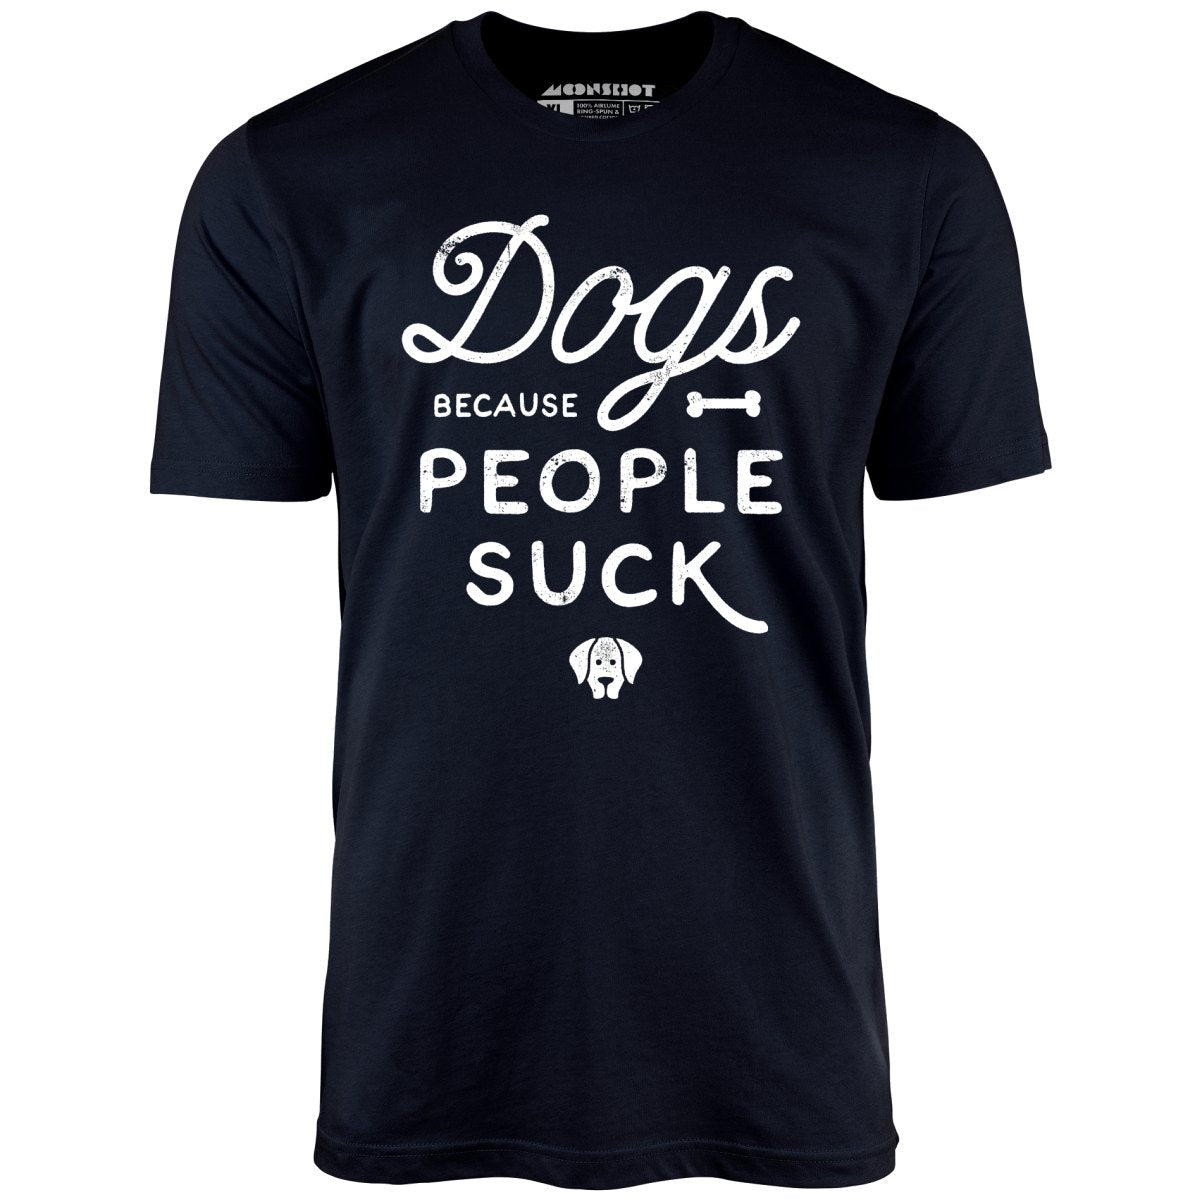 Dogs Because People Suck - Unisex T-Shirt